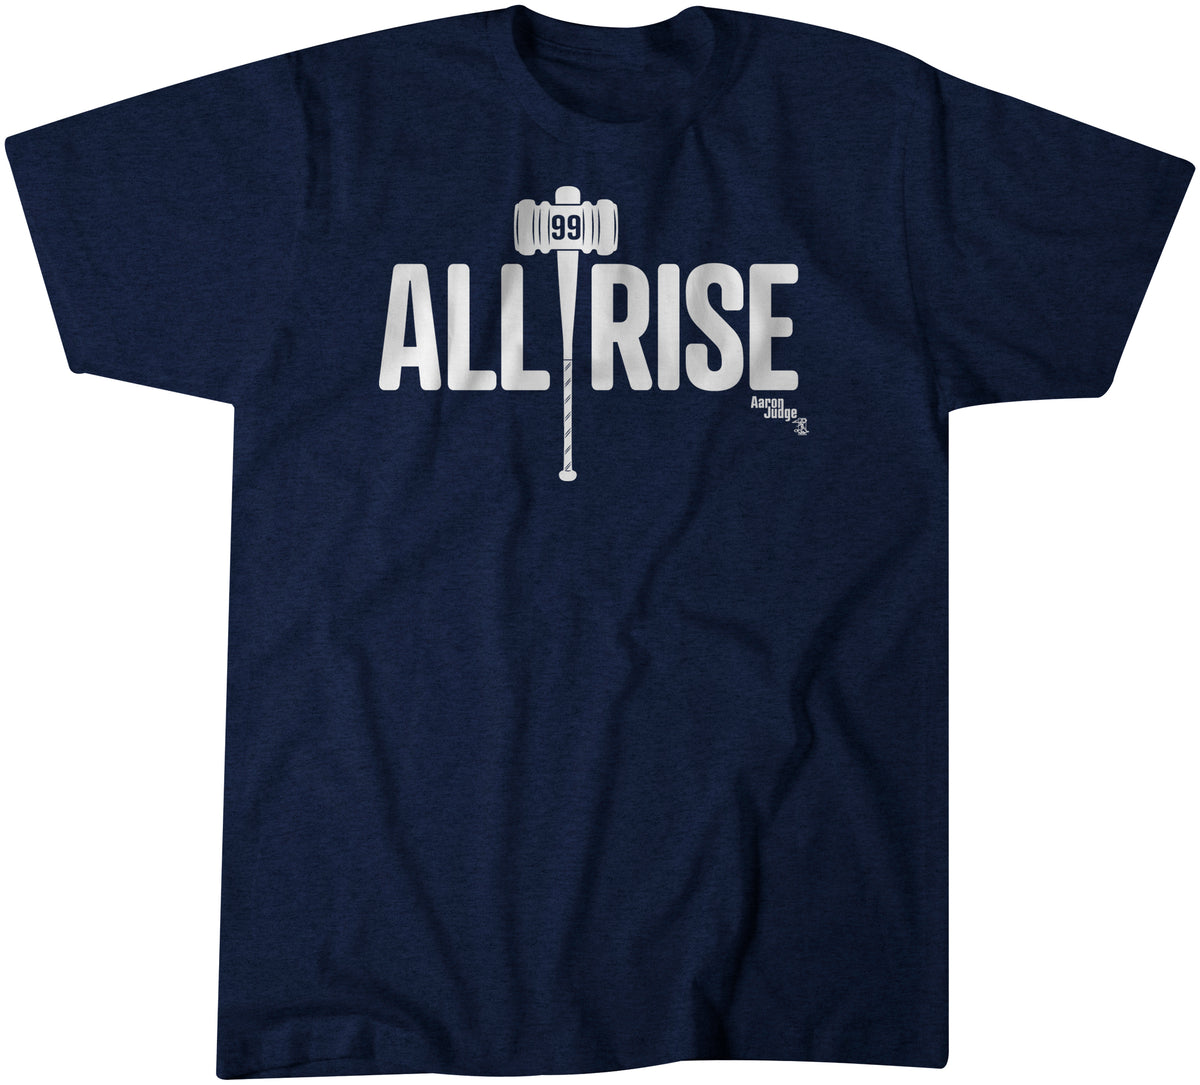 Official 99 Aaron Judge New York All Rise Signatures T-Shirts